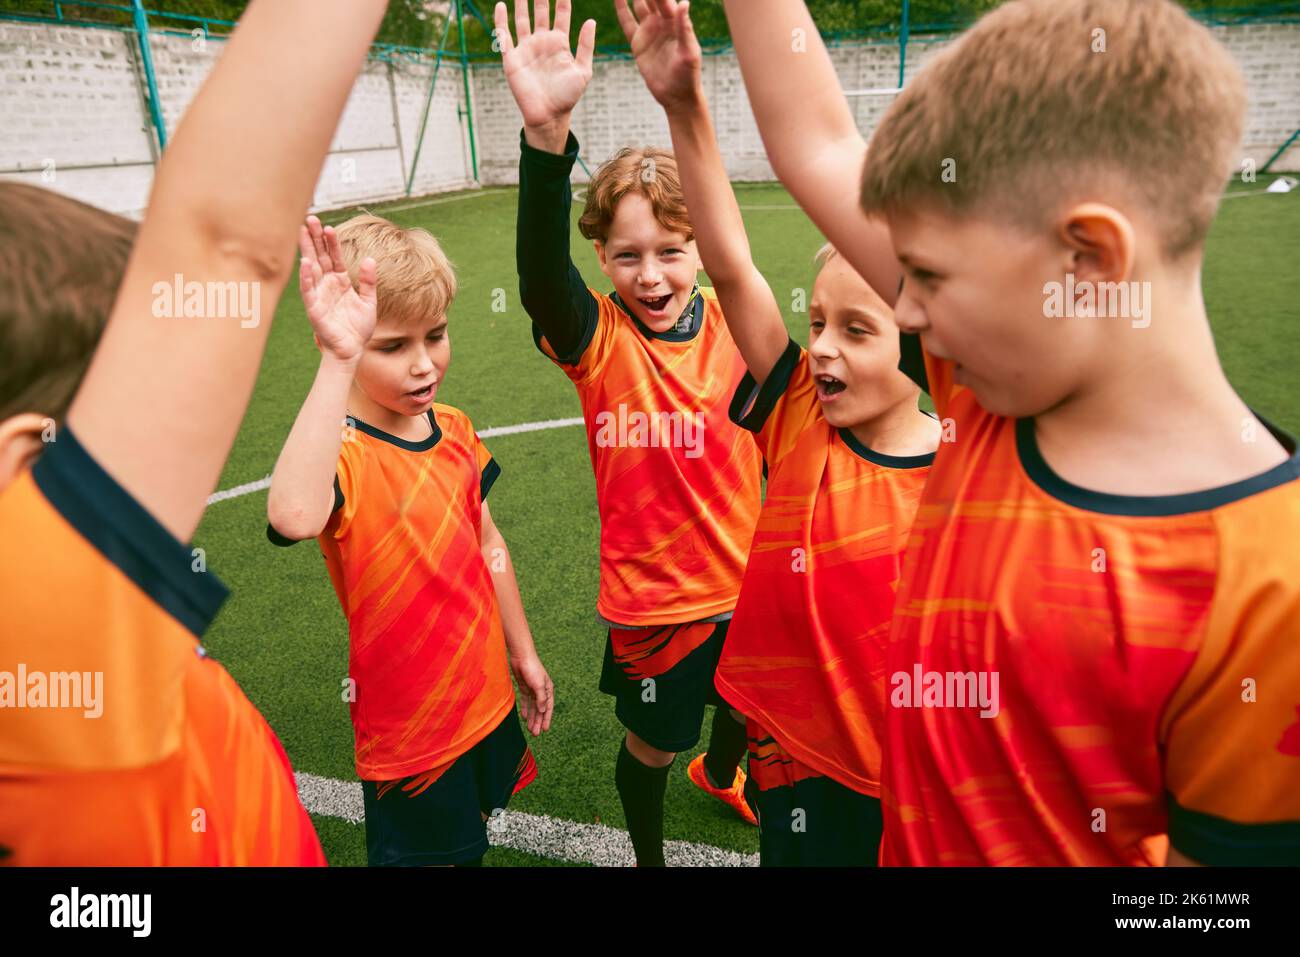 Soccer junior team with medals and trophy. Sportive boys celebrating victory. Concept of win, sport, studying, achievements, success. Stock Photo